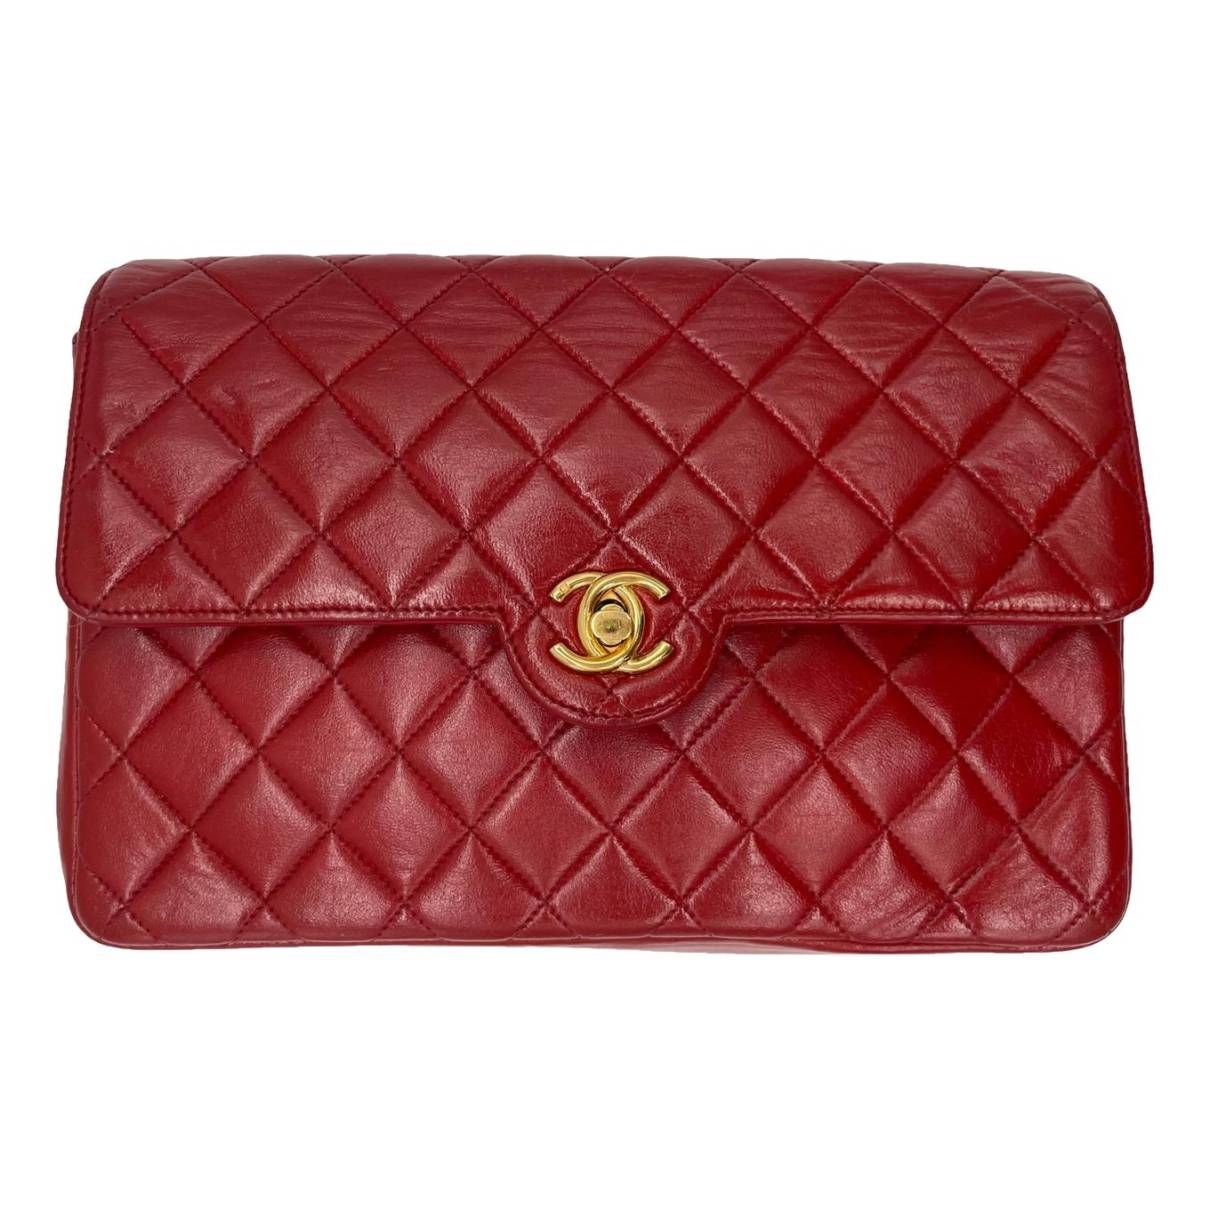 Timeless/classique leather crossbody bag Chanel Red in Leather - 34762687